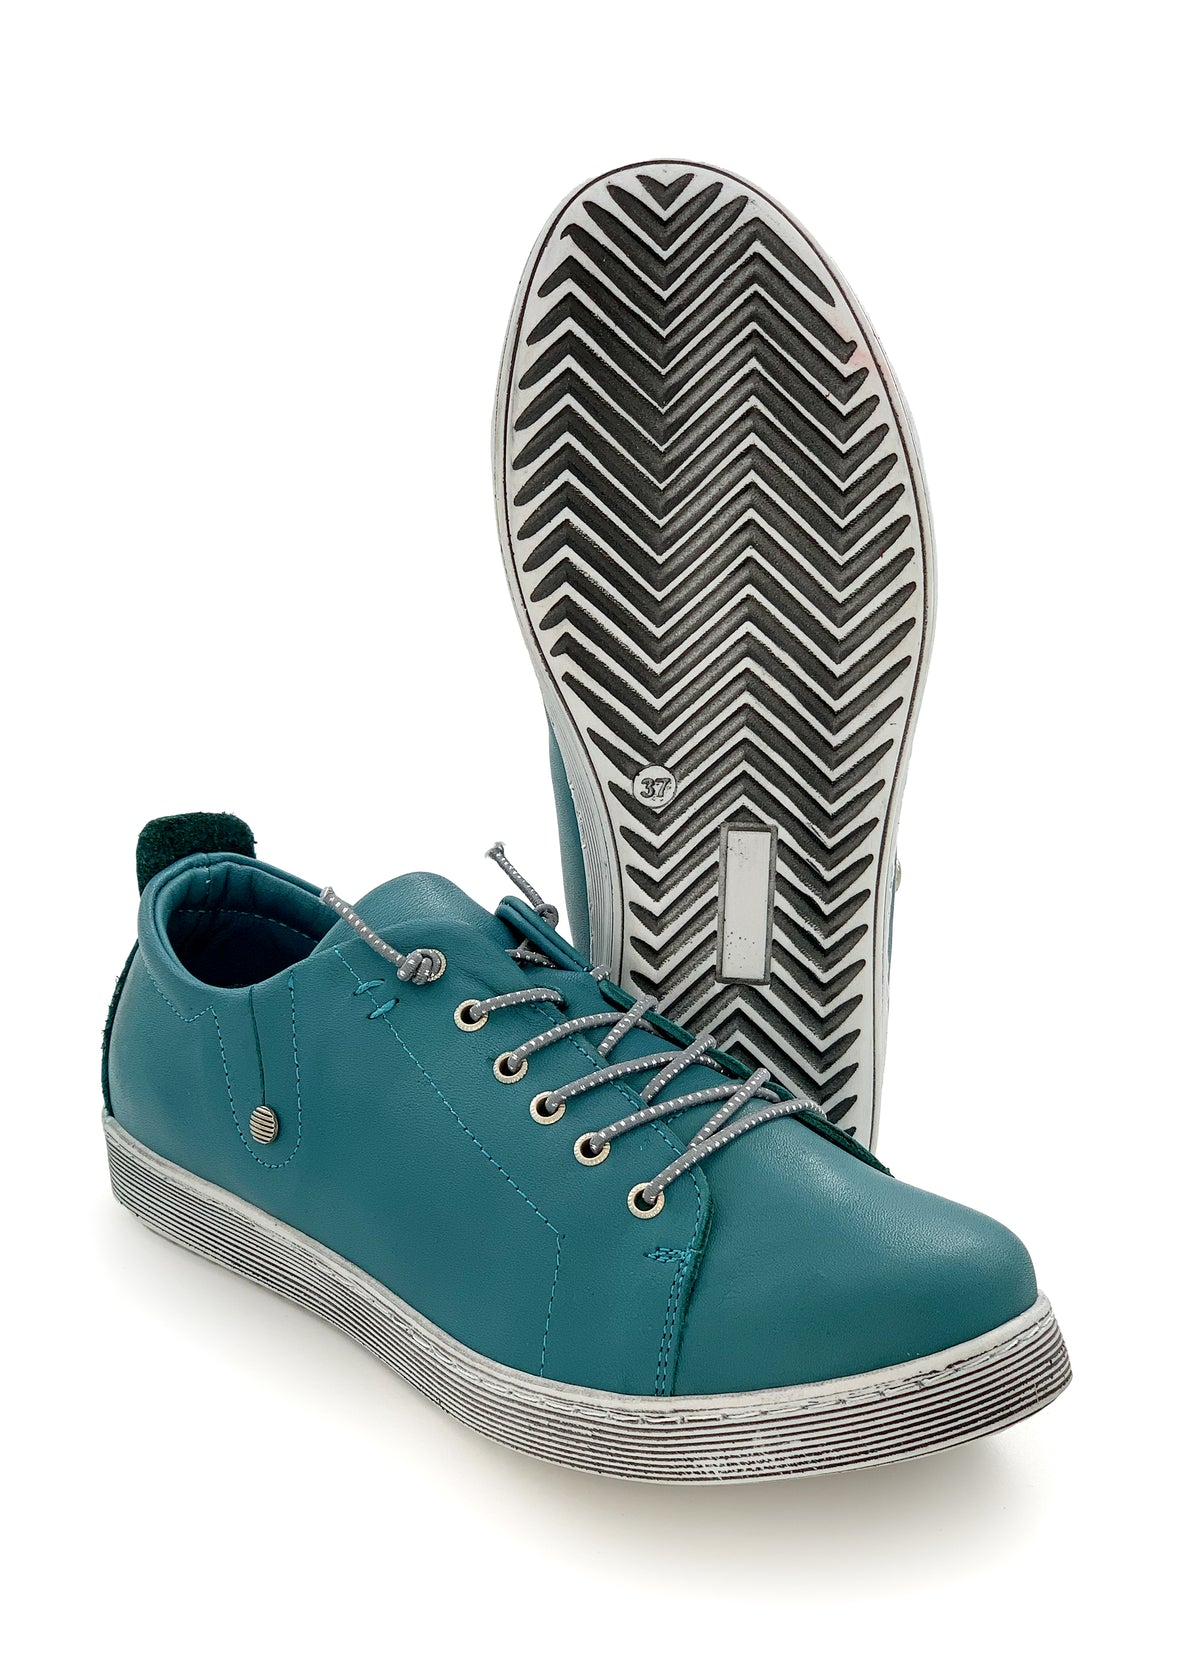 Low-top sneakers with elastic bands - topaz green leather